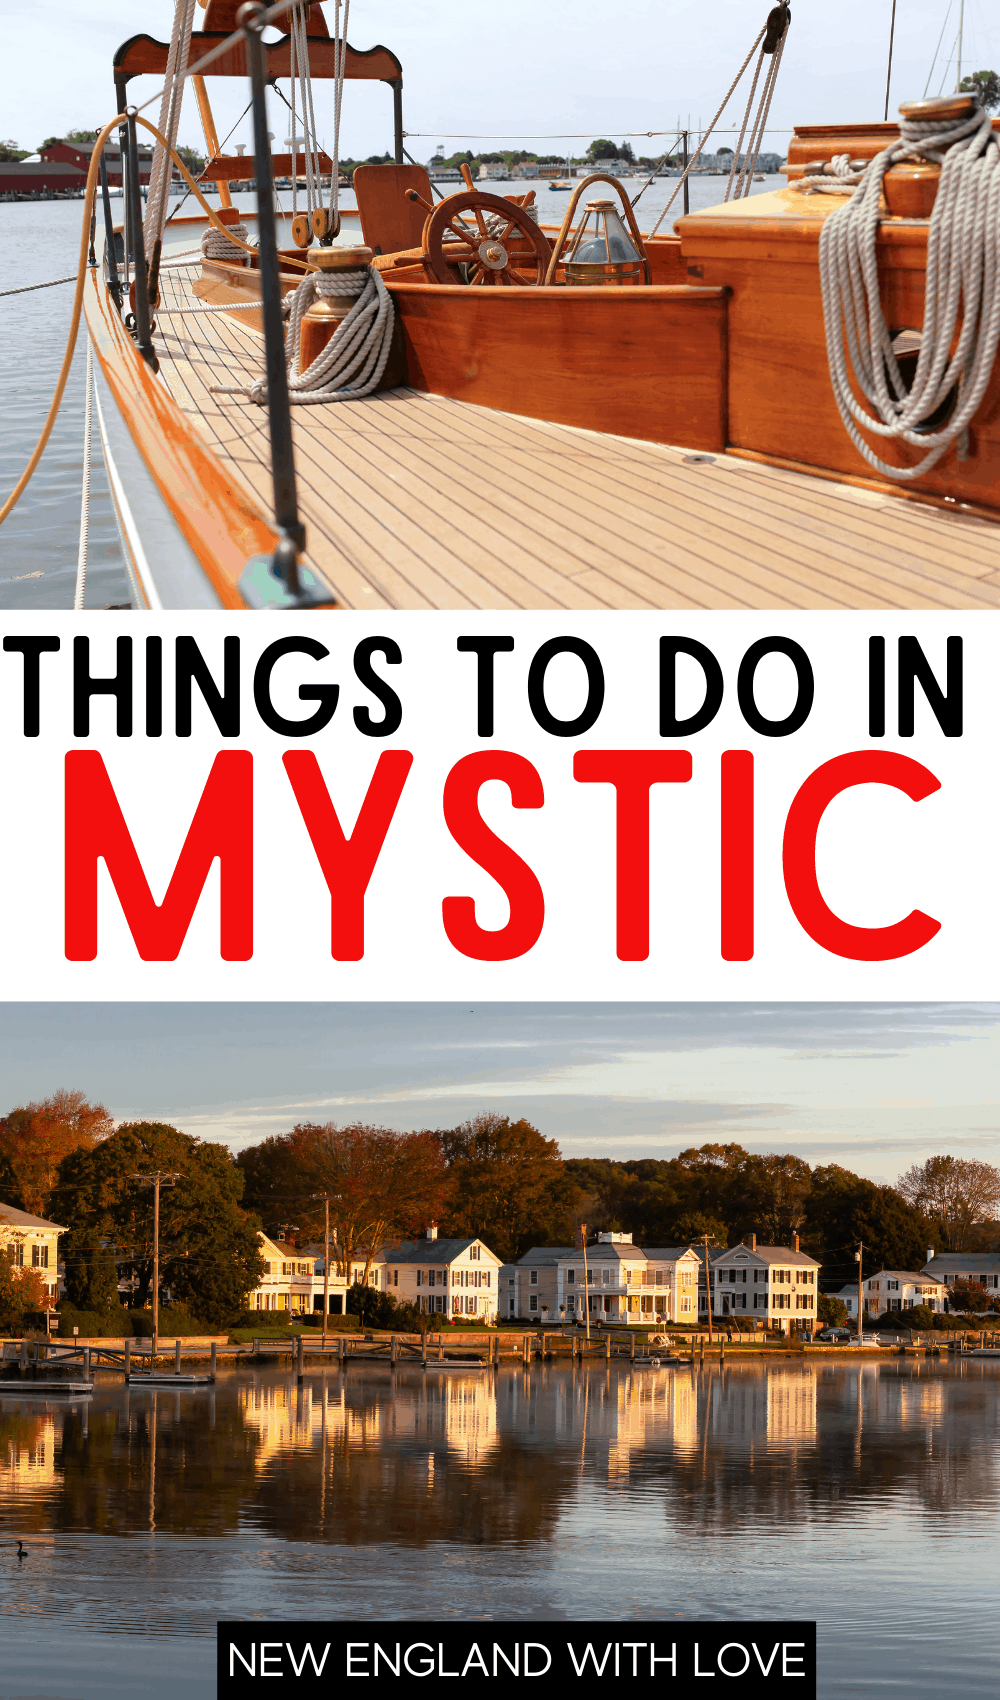 Pinterest graphic reading "THINGS TO DO IN MYSTIC"